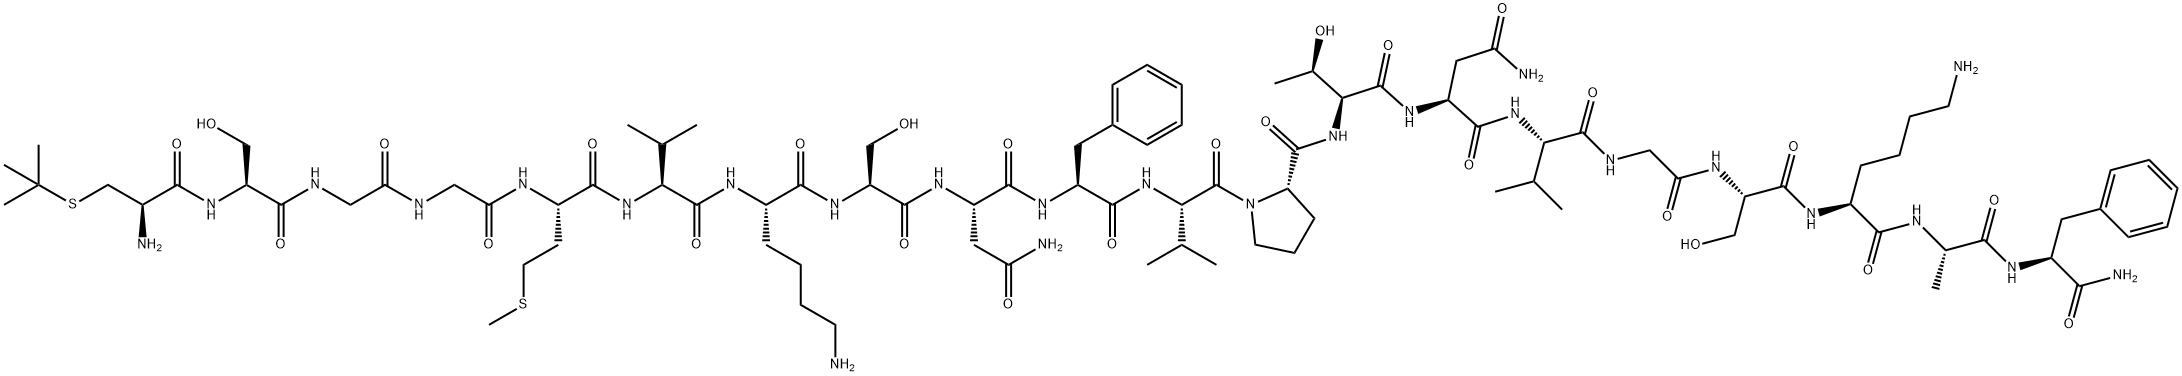 calcitonin gene-related peptide (19-37), t-butyl-Cys(18)- Structure